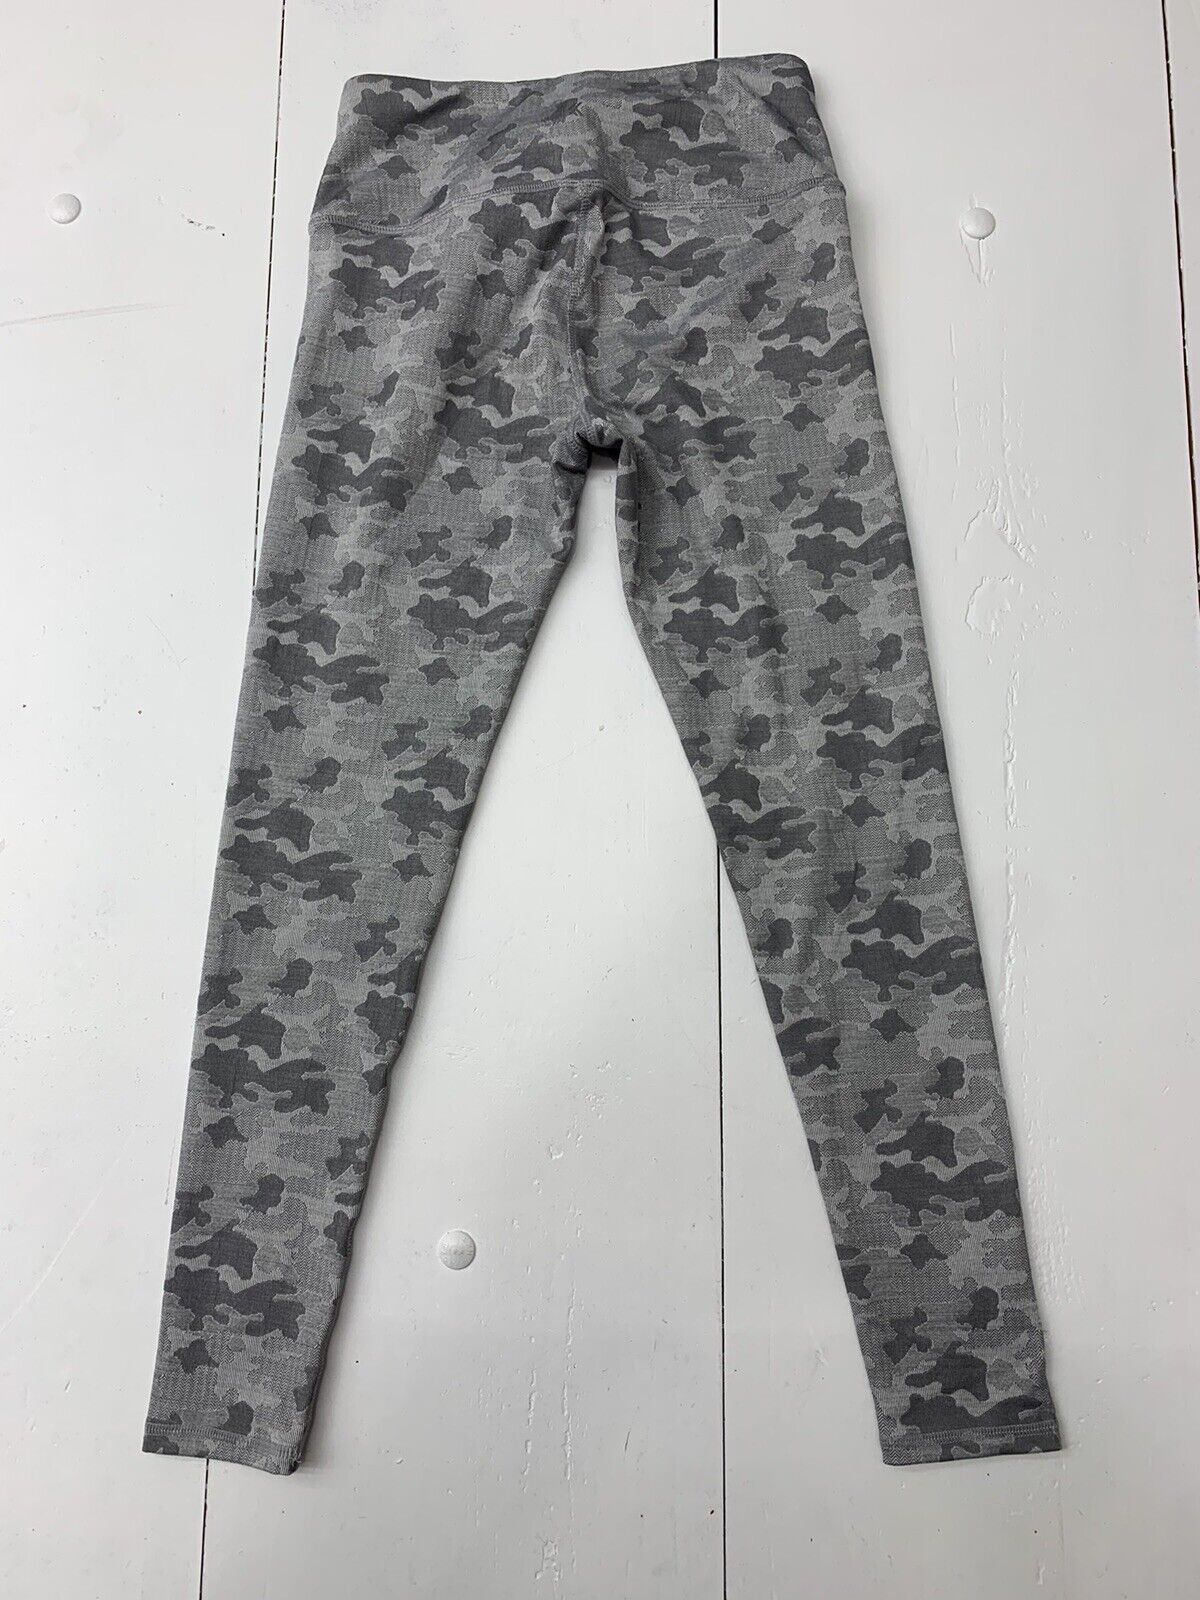 Kyodan Womens Grey Camouflage Athletic Leggings Size Small